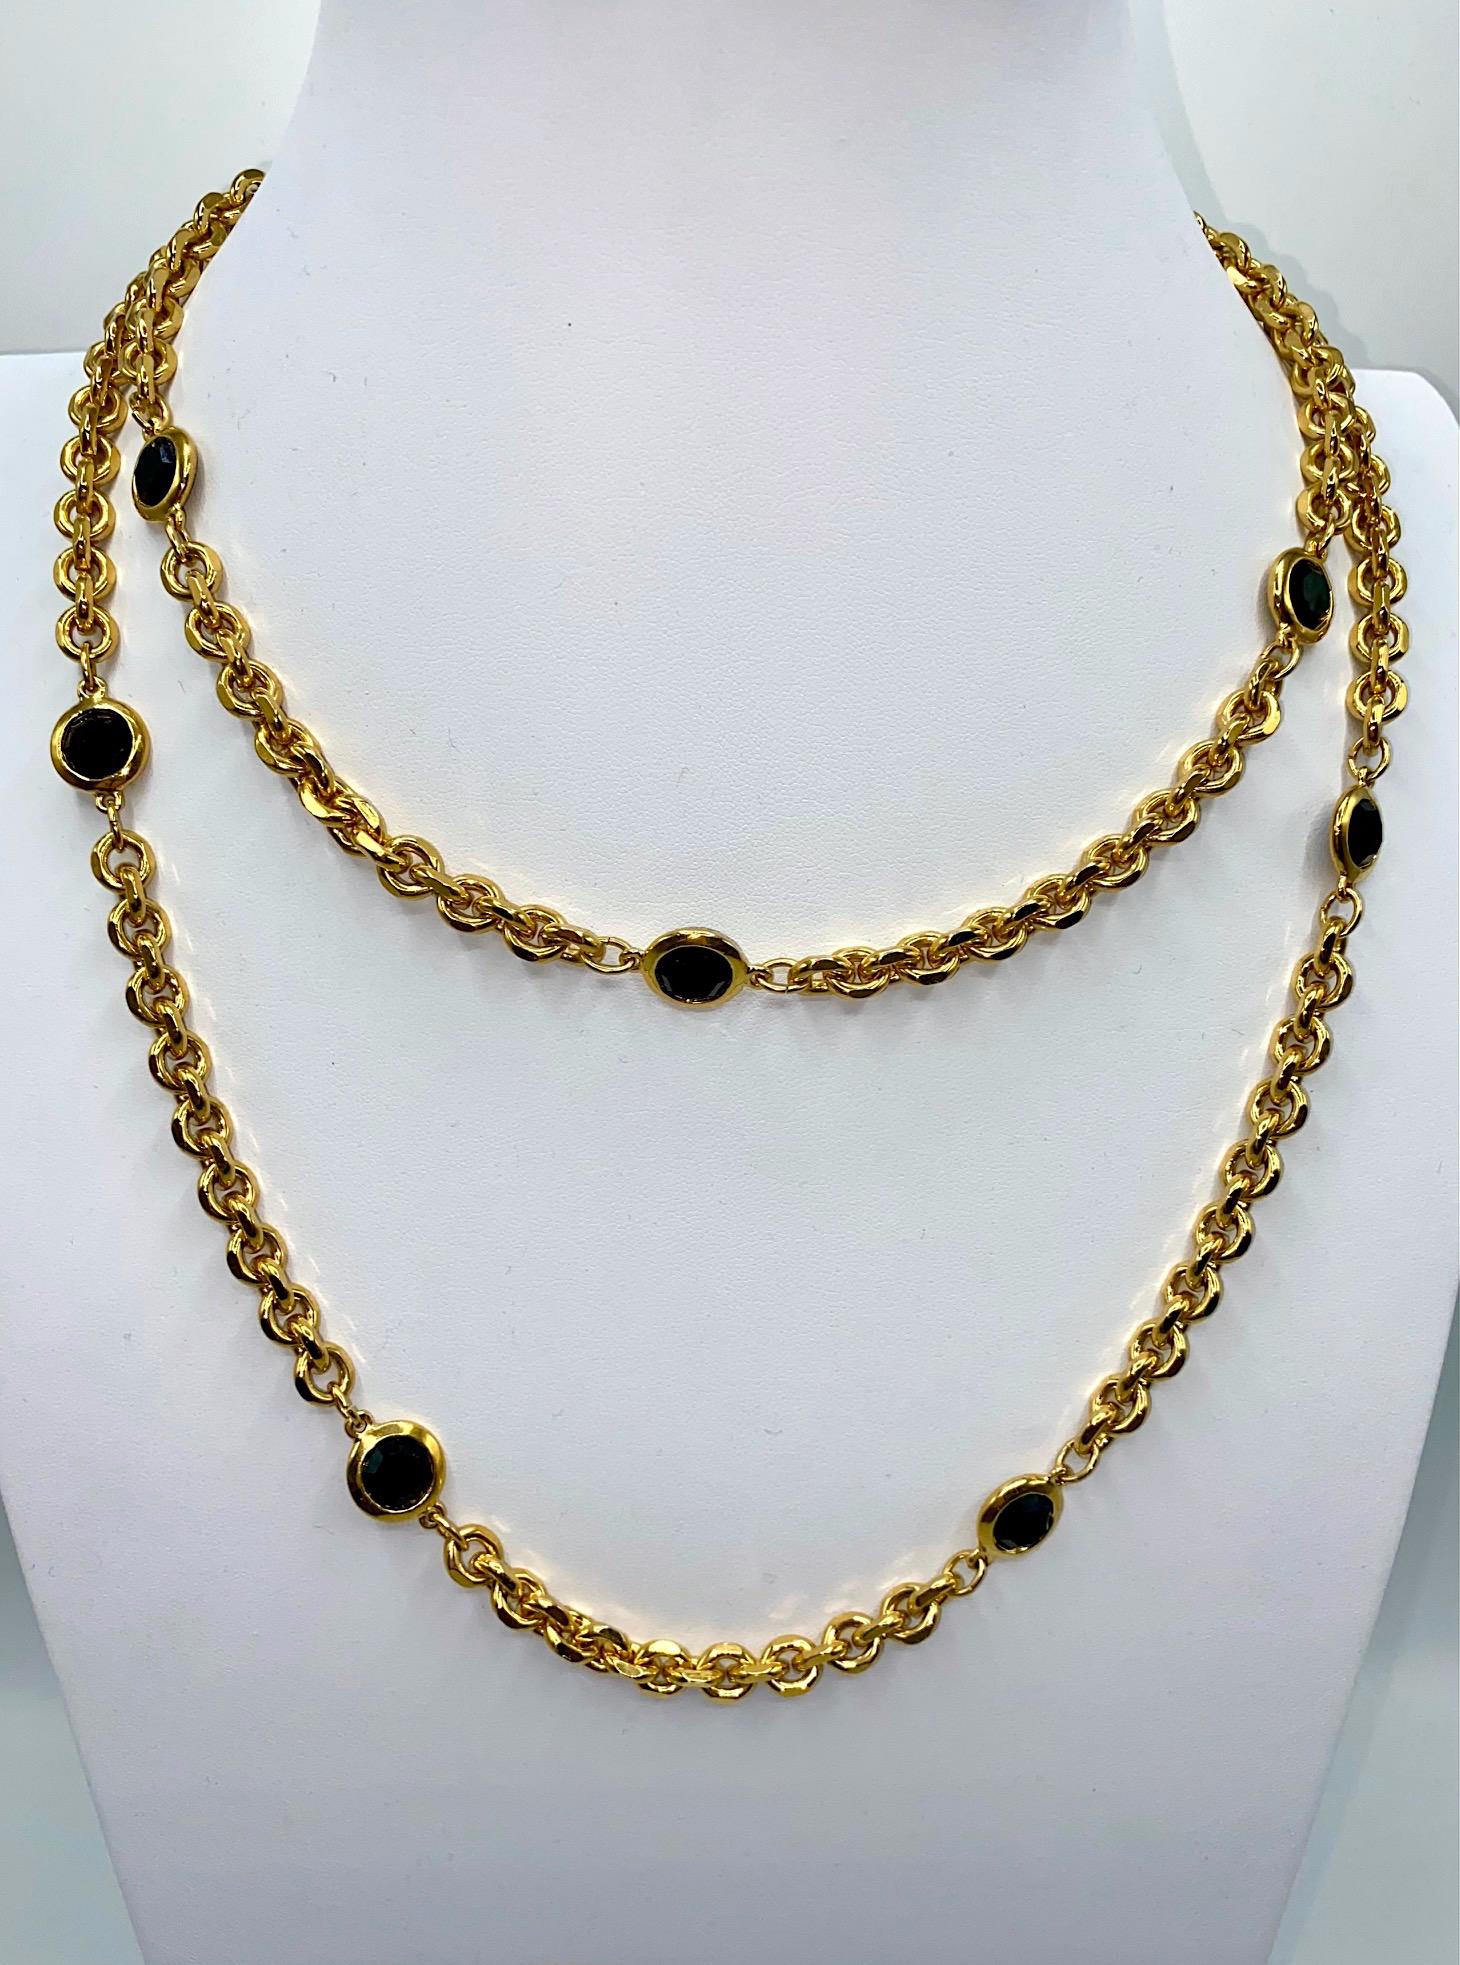 St. John Collection classic long gold chain necklace with bevel set round faceted glass crystal spacers. The chain is a beveled edge cable link in heavy gold plate measuring 8 mm / .32 of an inch wide and 48 inches long. Easily worn long or doubled